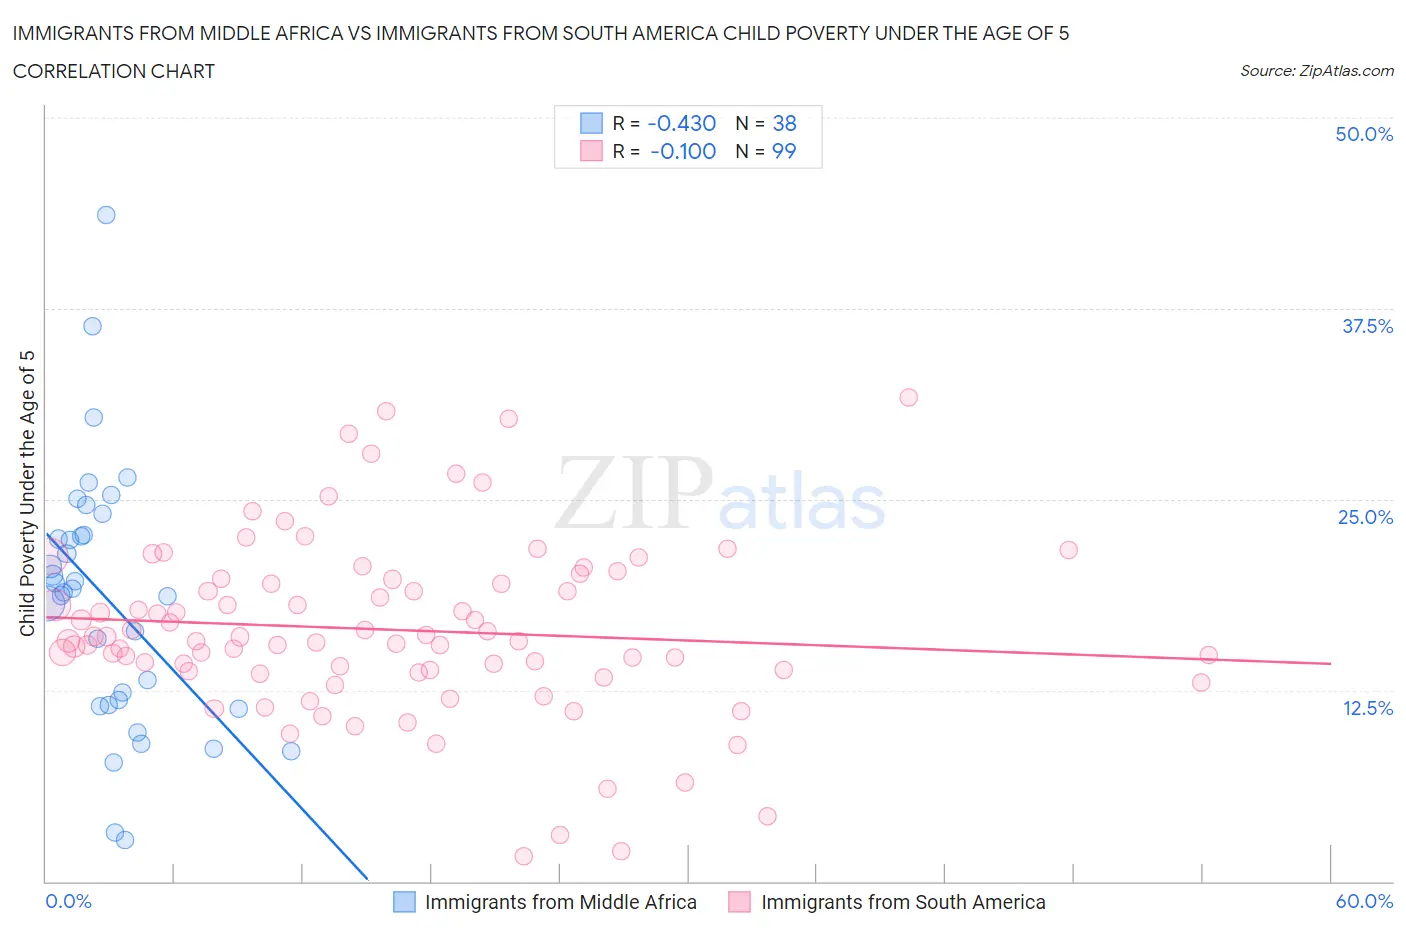 Immigrants from Middle Africa vs Immigrants from South America Child Poverty Under the Age of 5